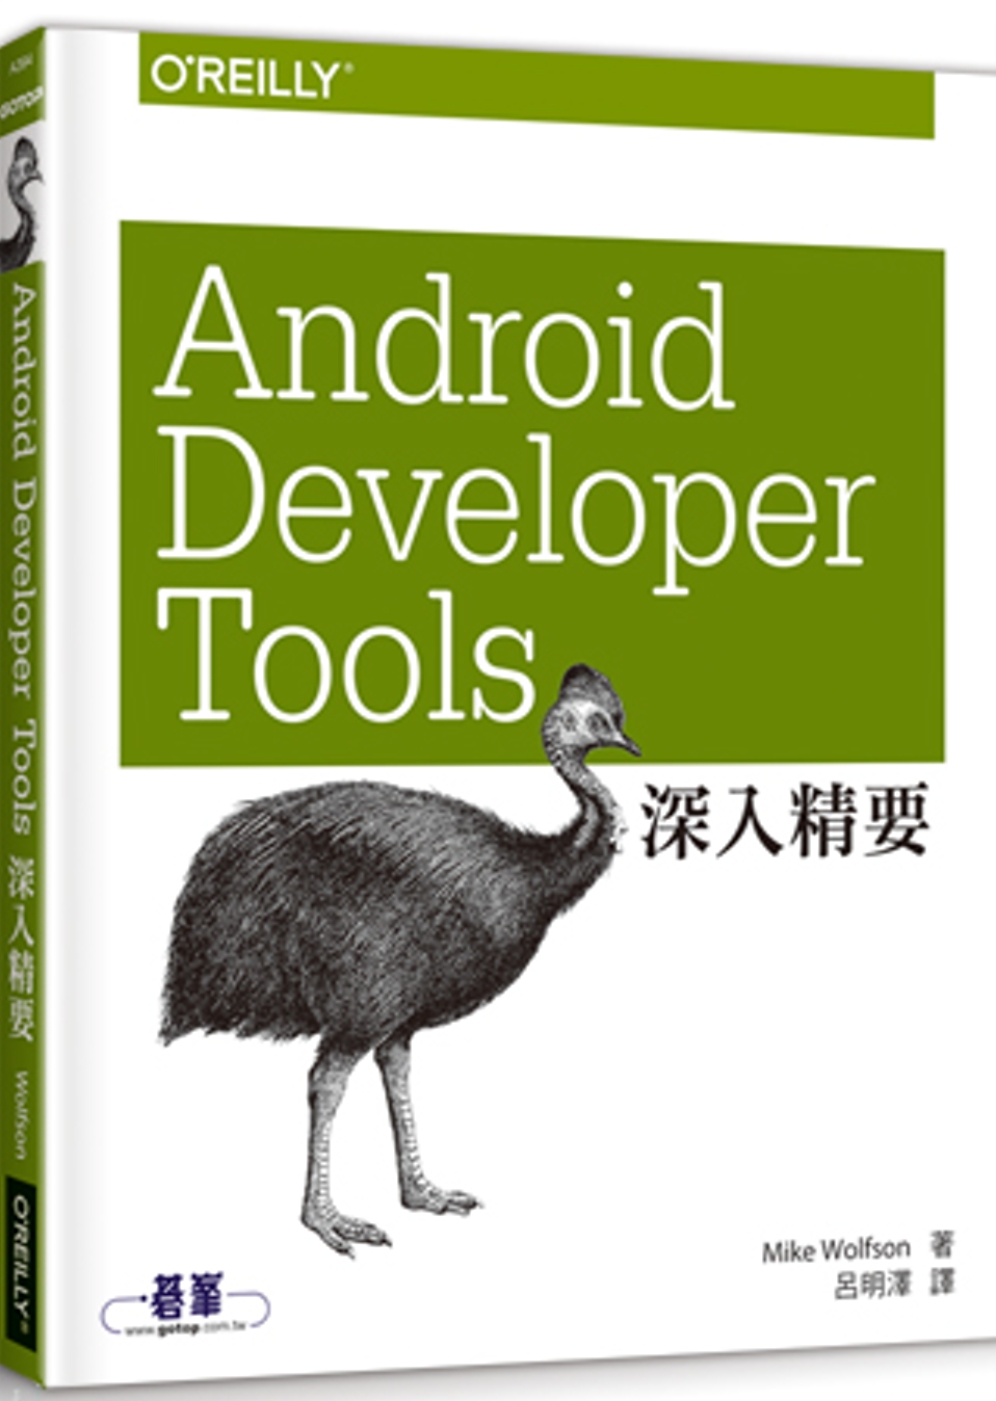 Android Developer Tools 深入精要